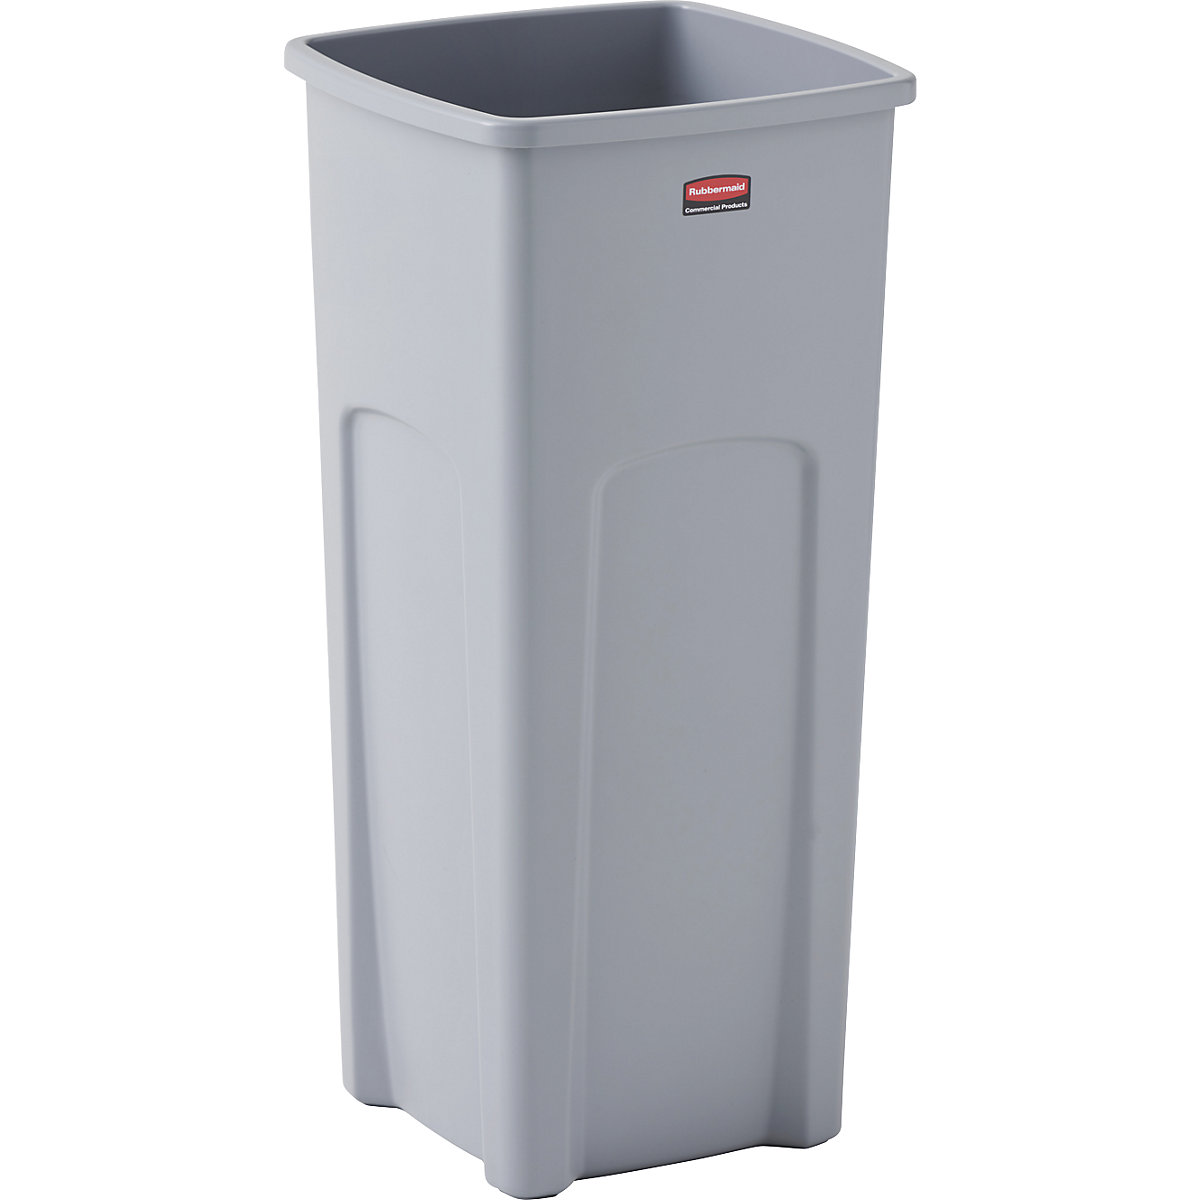 UNTOUCHABLE® recyclable waste container - Rubbermaid